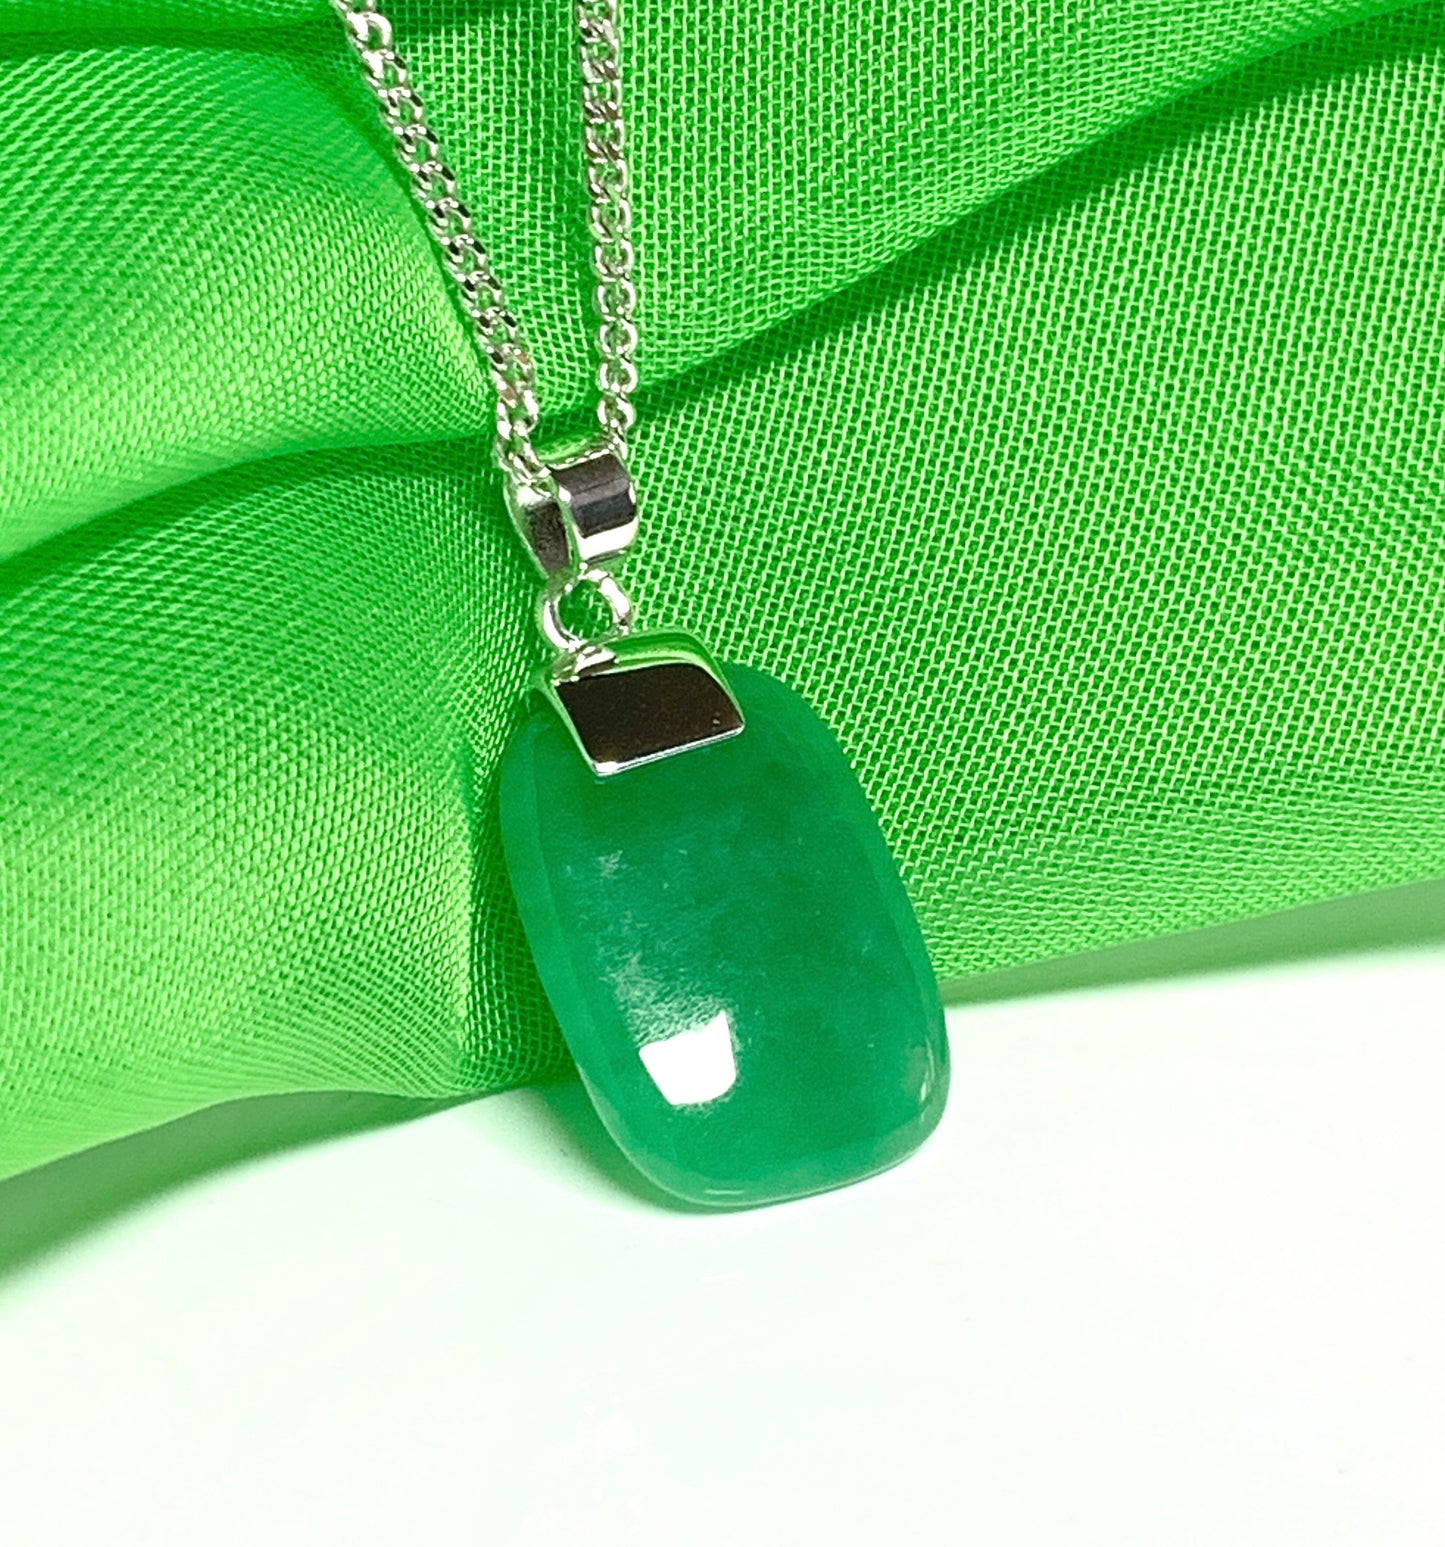 Real green jade pendant necklace cushion shaped sterling silver